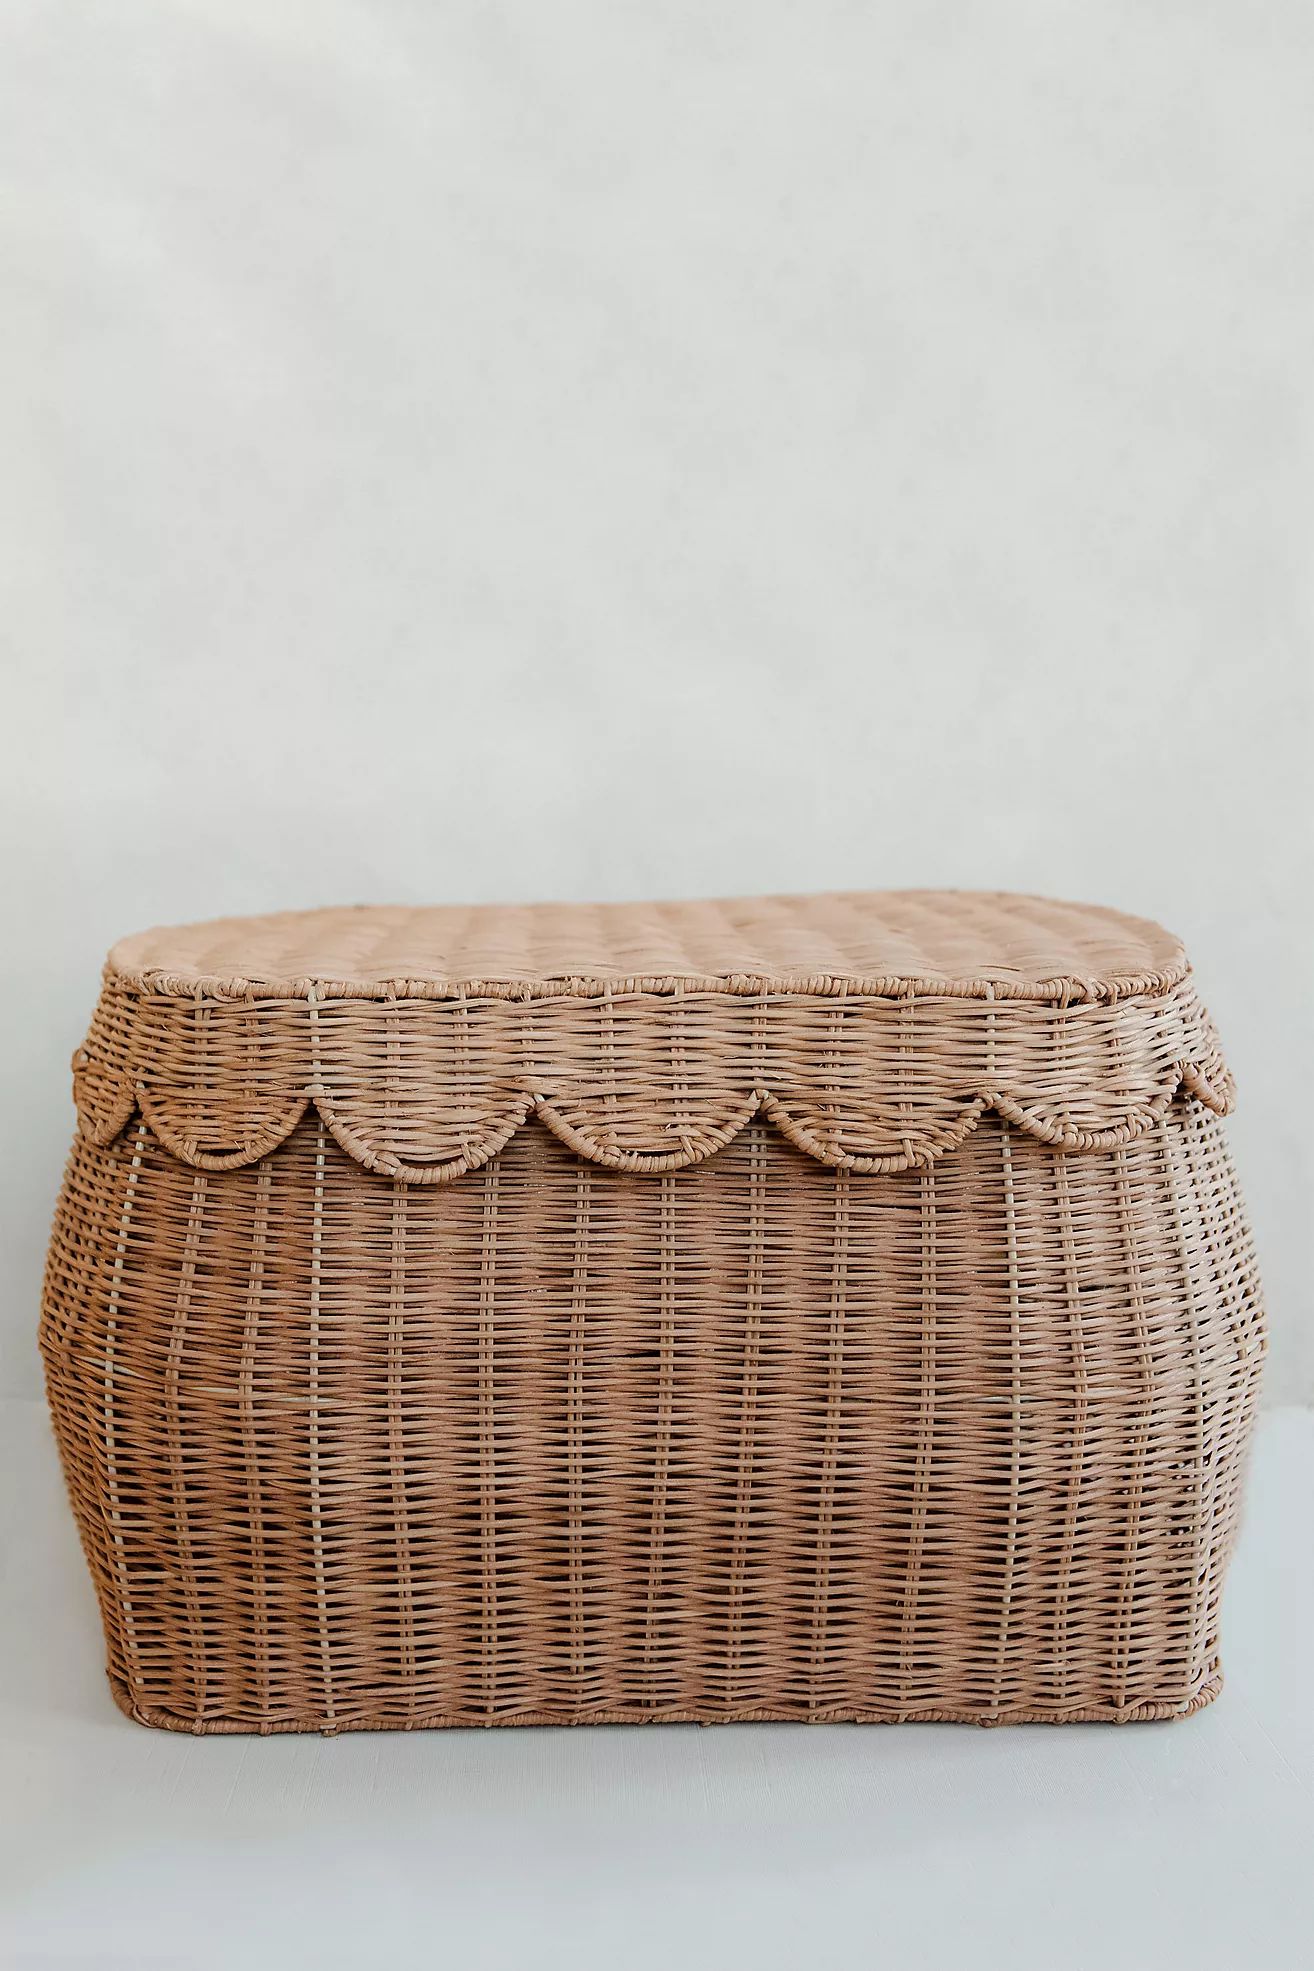 Connected Goods Sage Scalloped Storage Basket with Lid | Anthropologie (US)